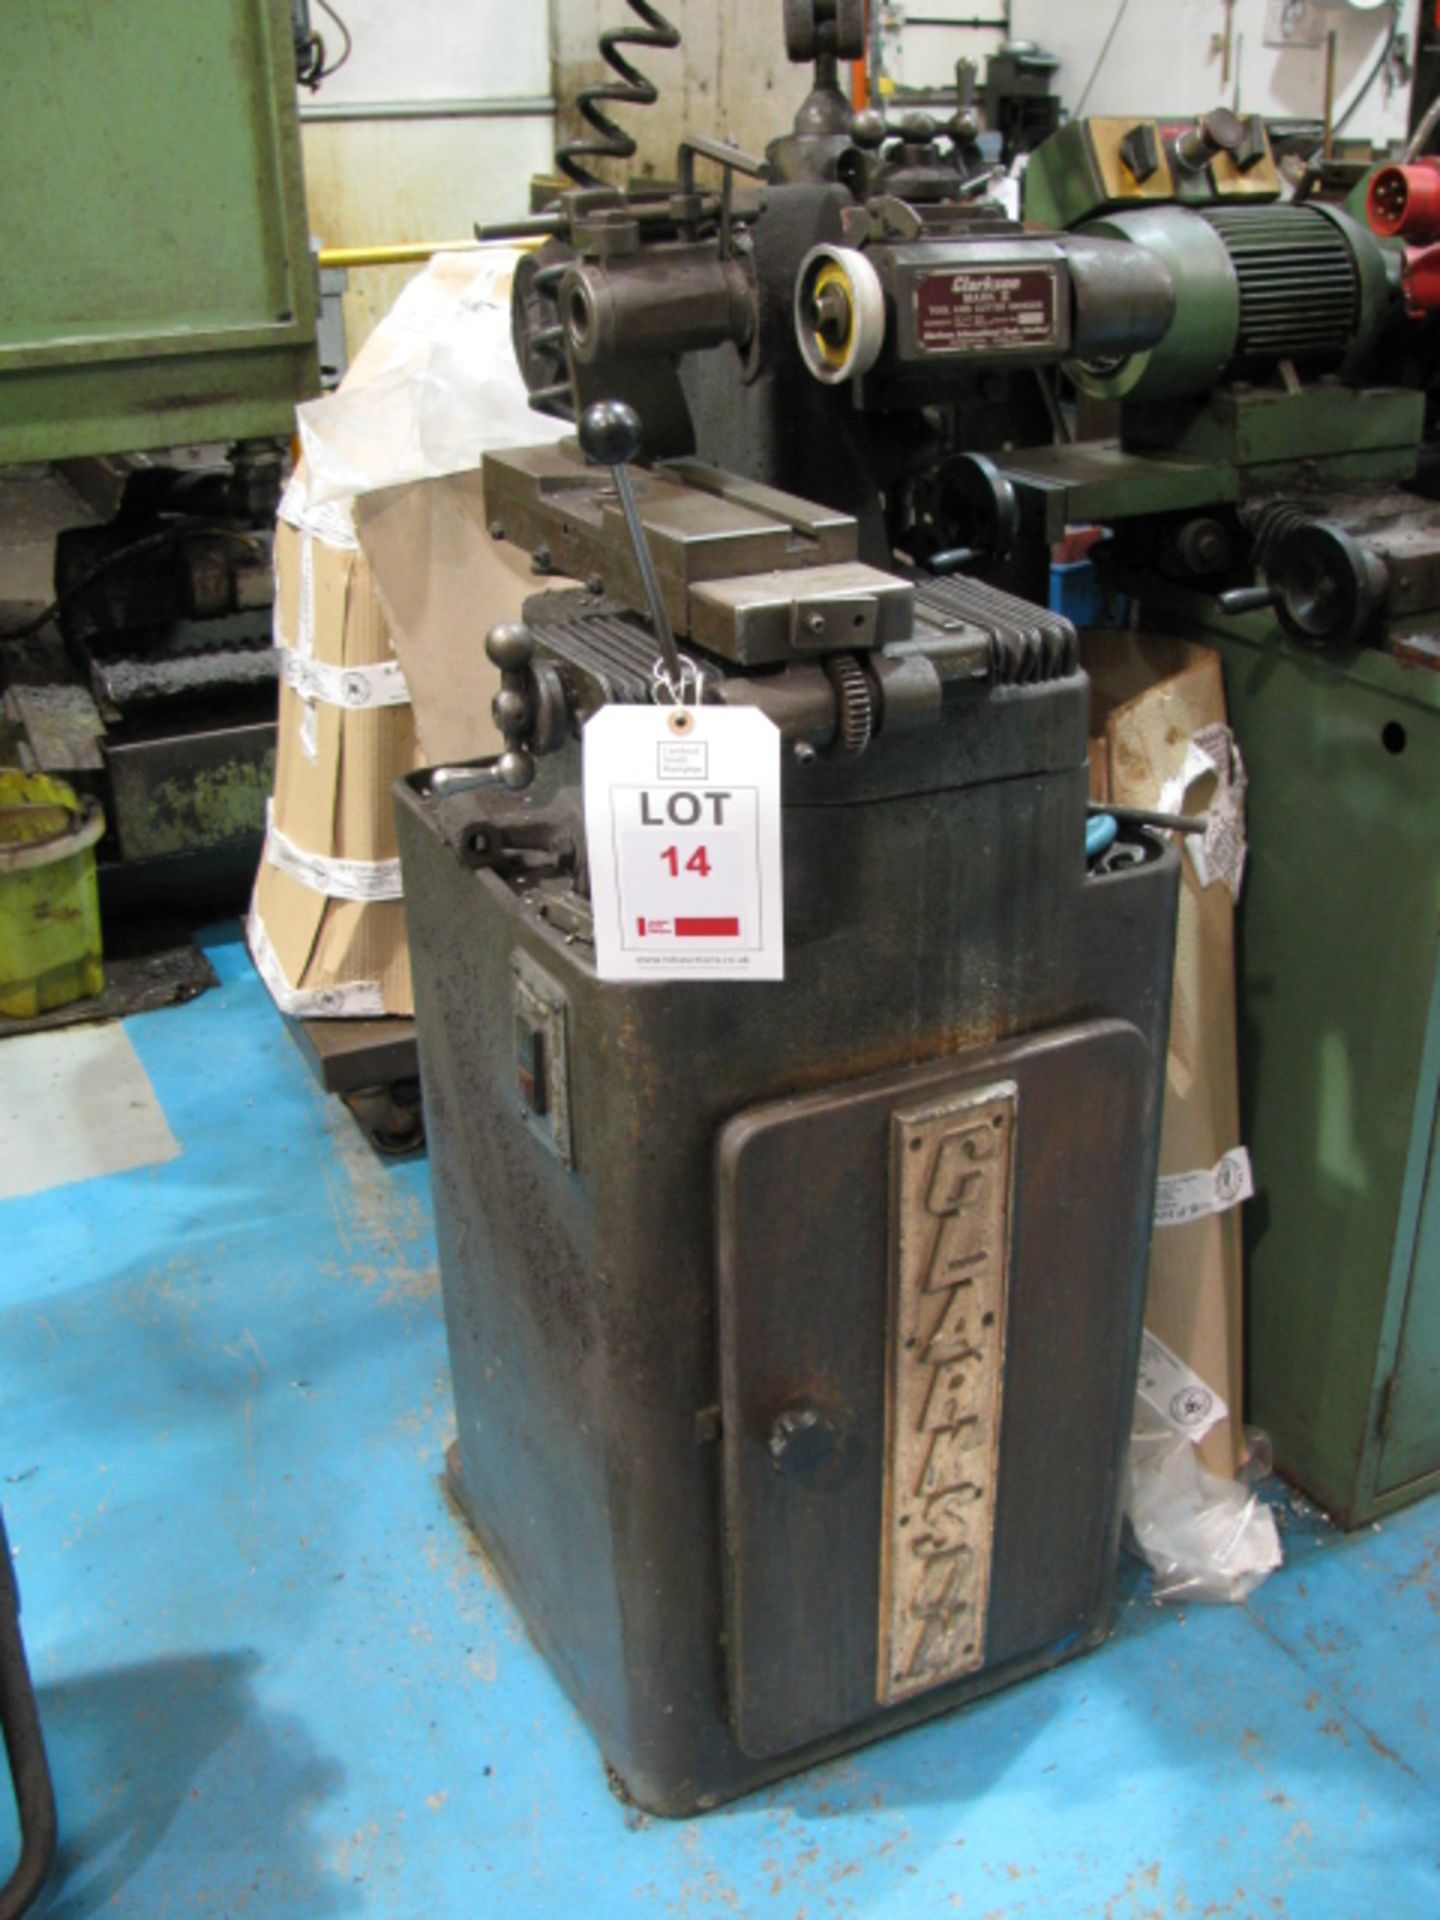 Clarkson Mark II tool and cutter grinder No. MT1201. NB: This item has no CE marking. The